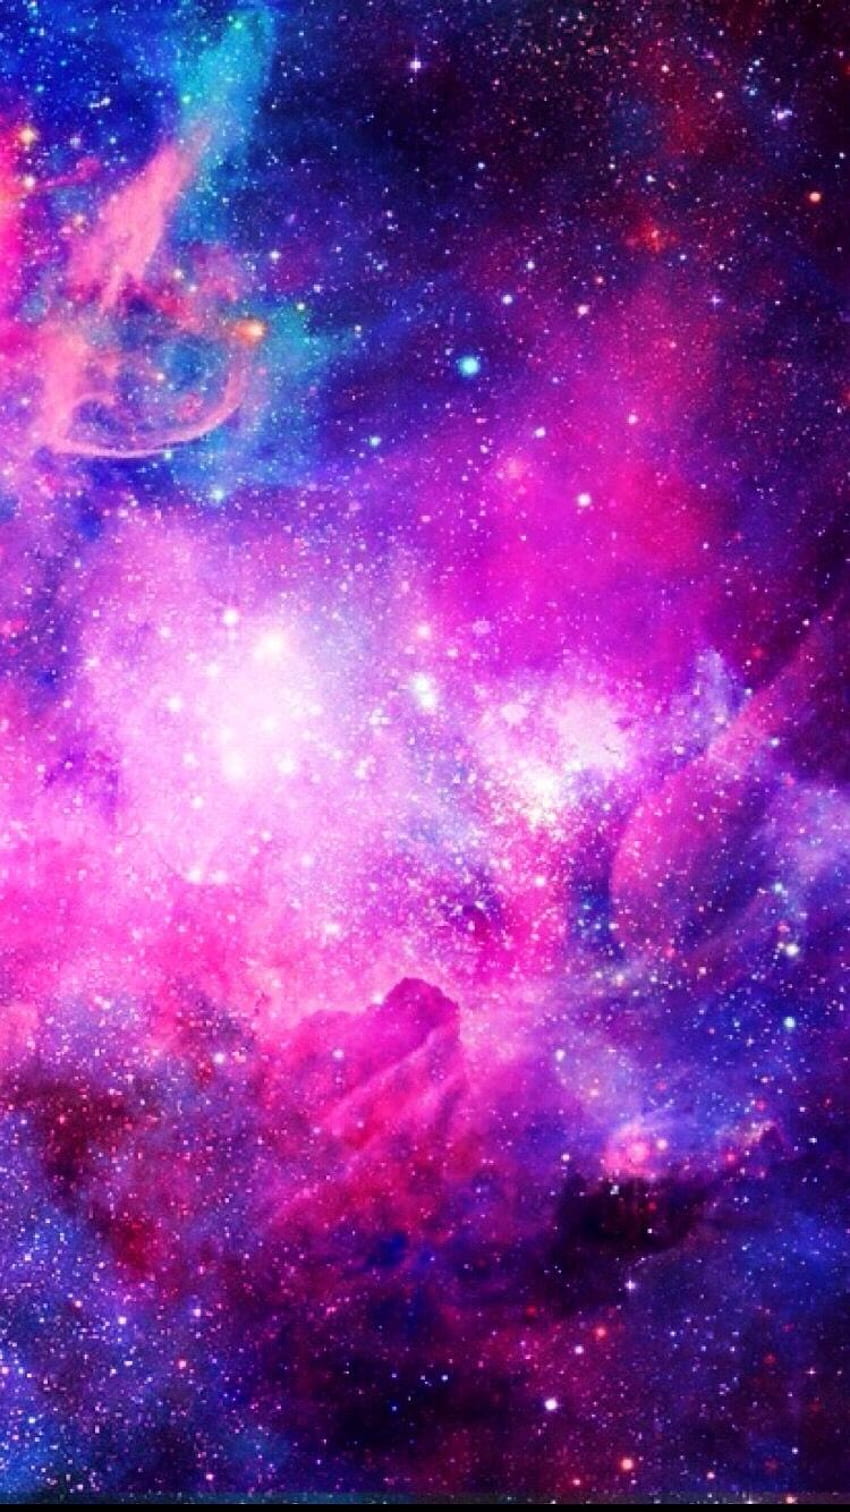 Give your phone screen a stunning new look with our collection of pink, blue, and purple galaxy wallpapers. Whether you prefer a more subtle pastel palette or a bold burst of cosmic colour, these images are the perfect way to express your love of all things space-related.